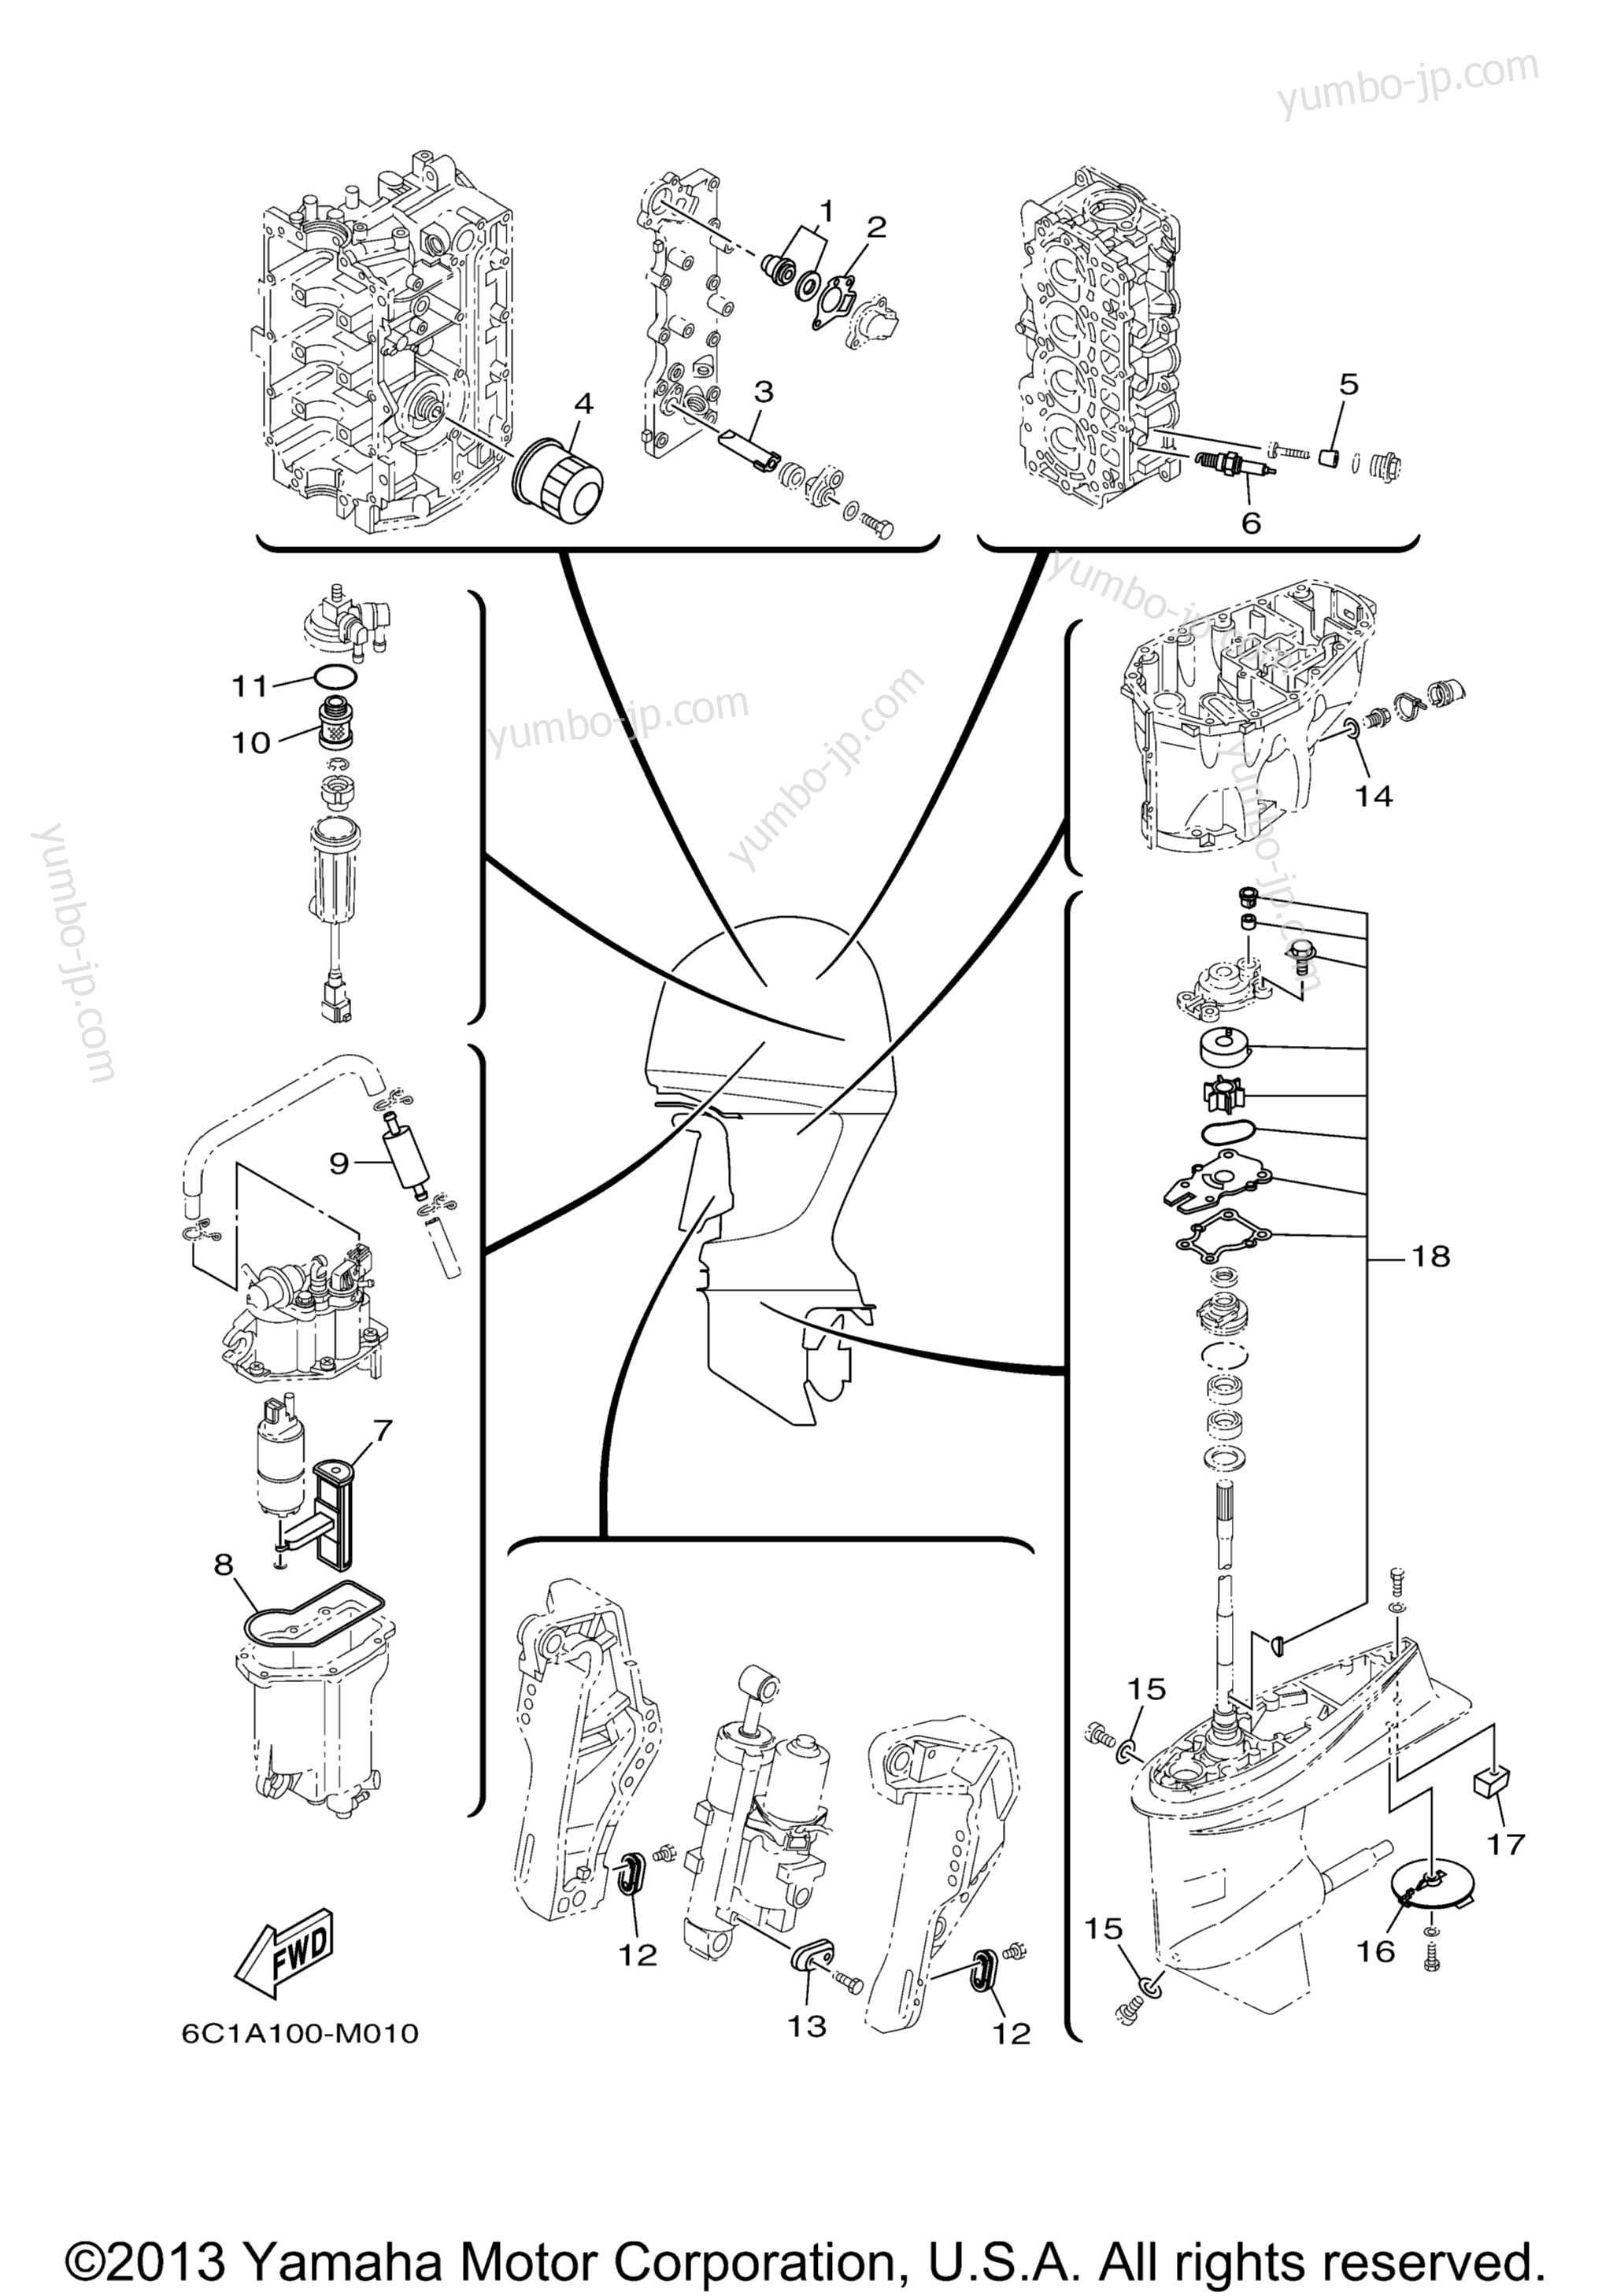 Scheduled Service Parts for outboards YAMAHA F60LHB (0113) 2006 year